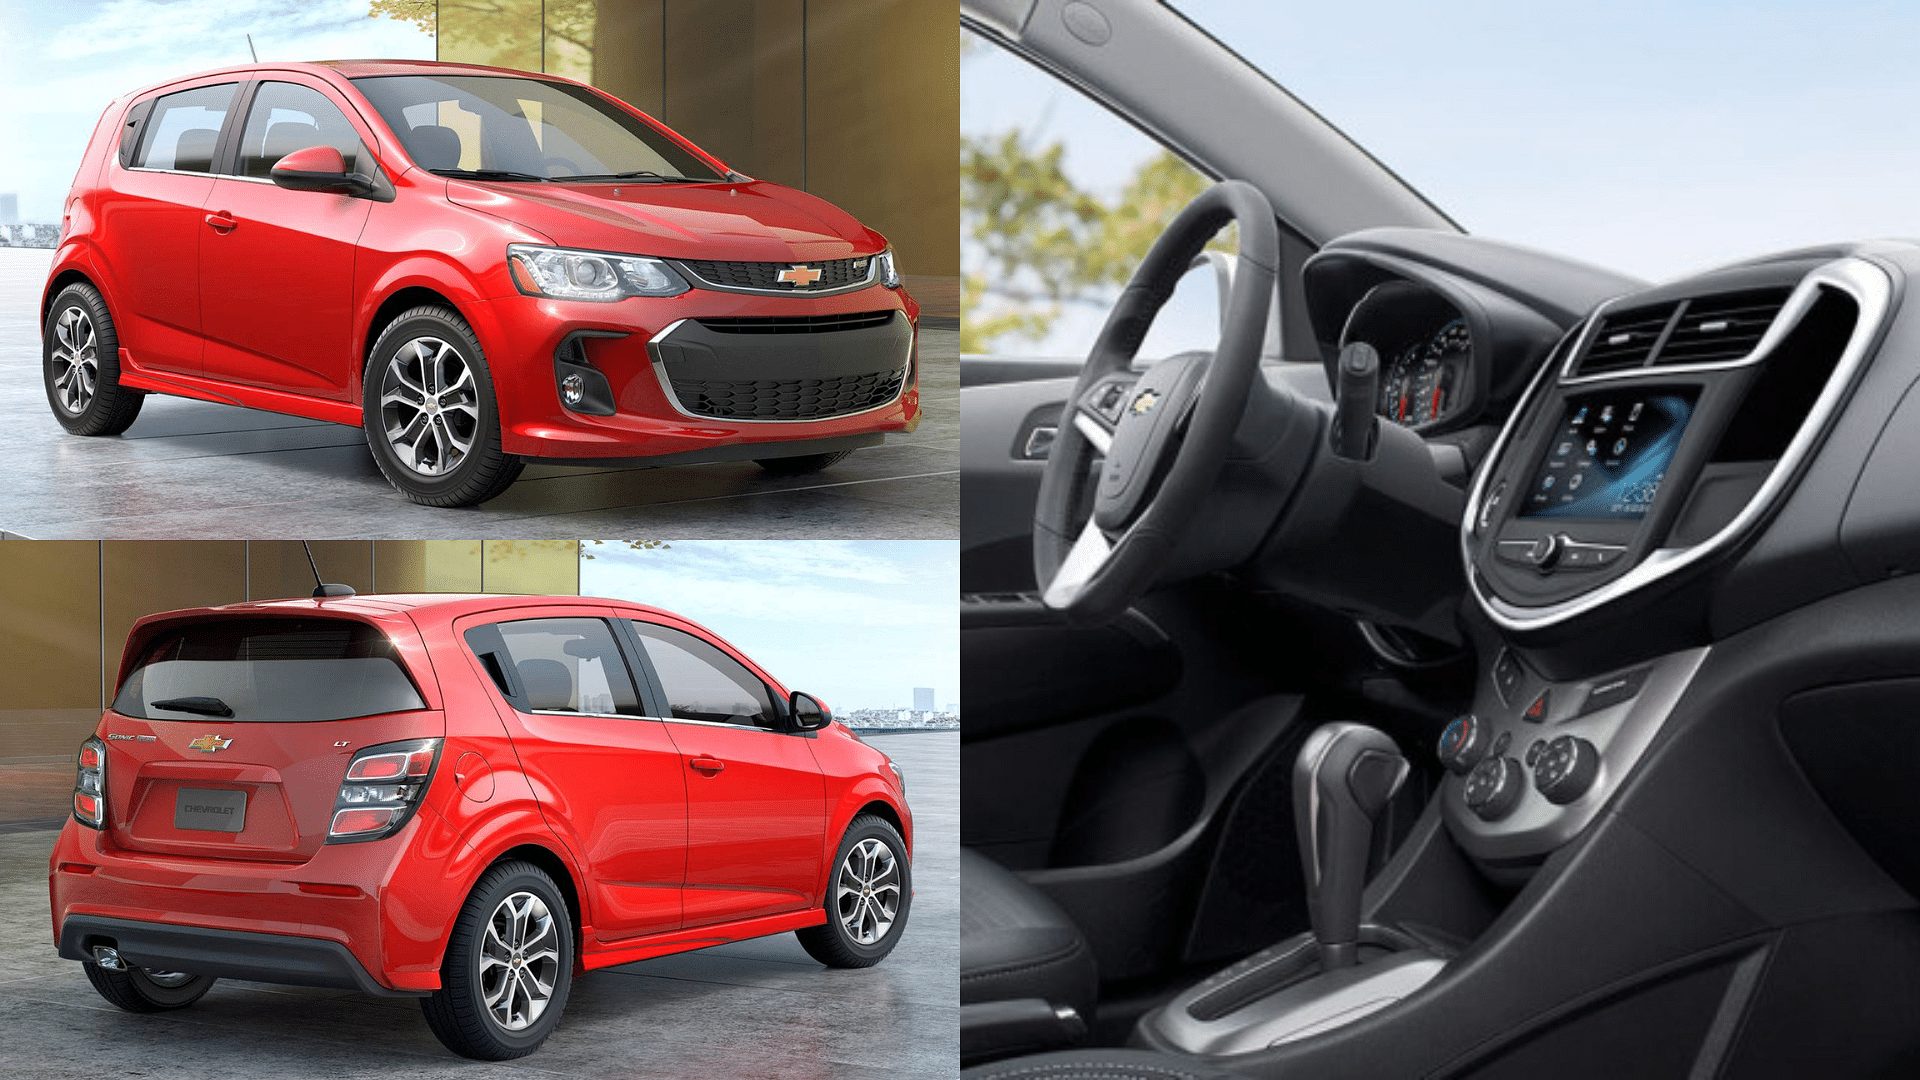 2016 Chevrolet Sonic - front and rear view, dashboard, steering, gearstick